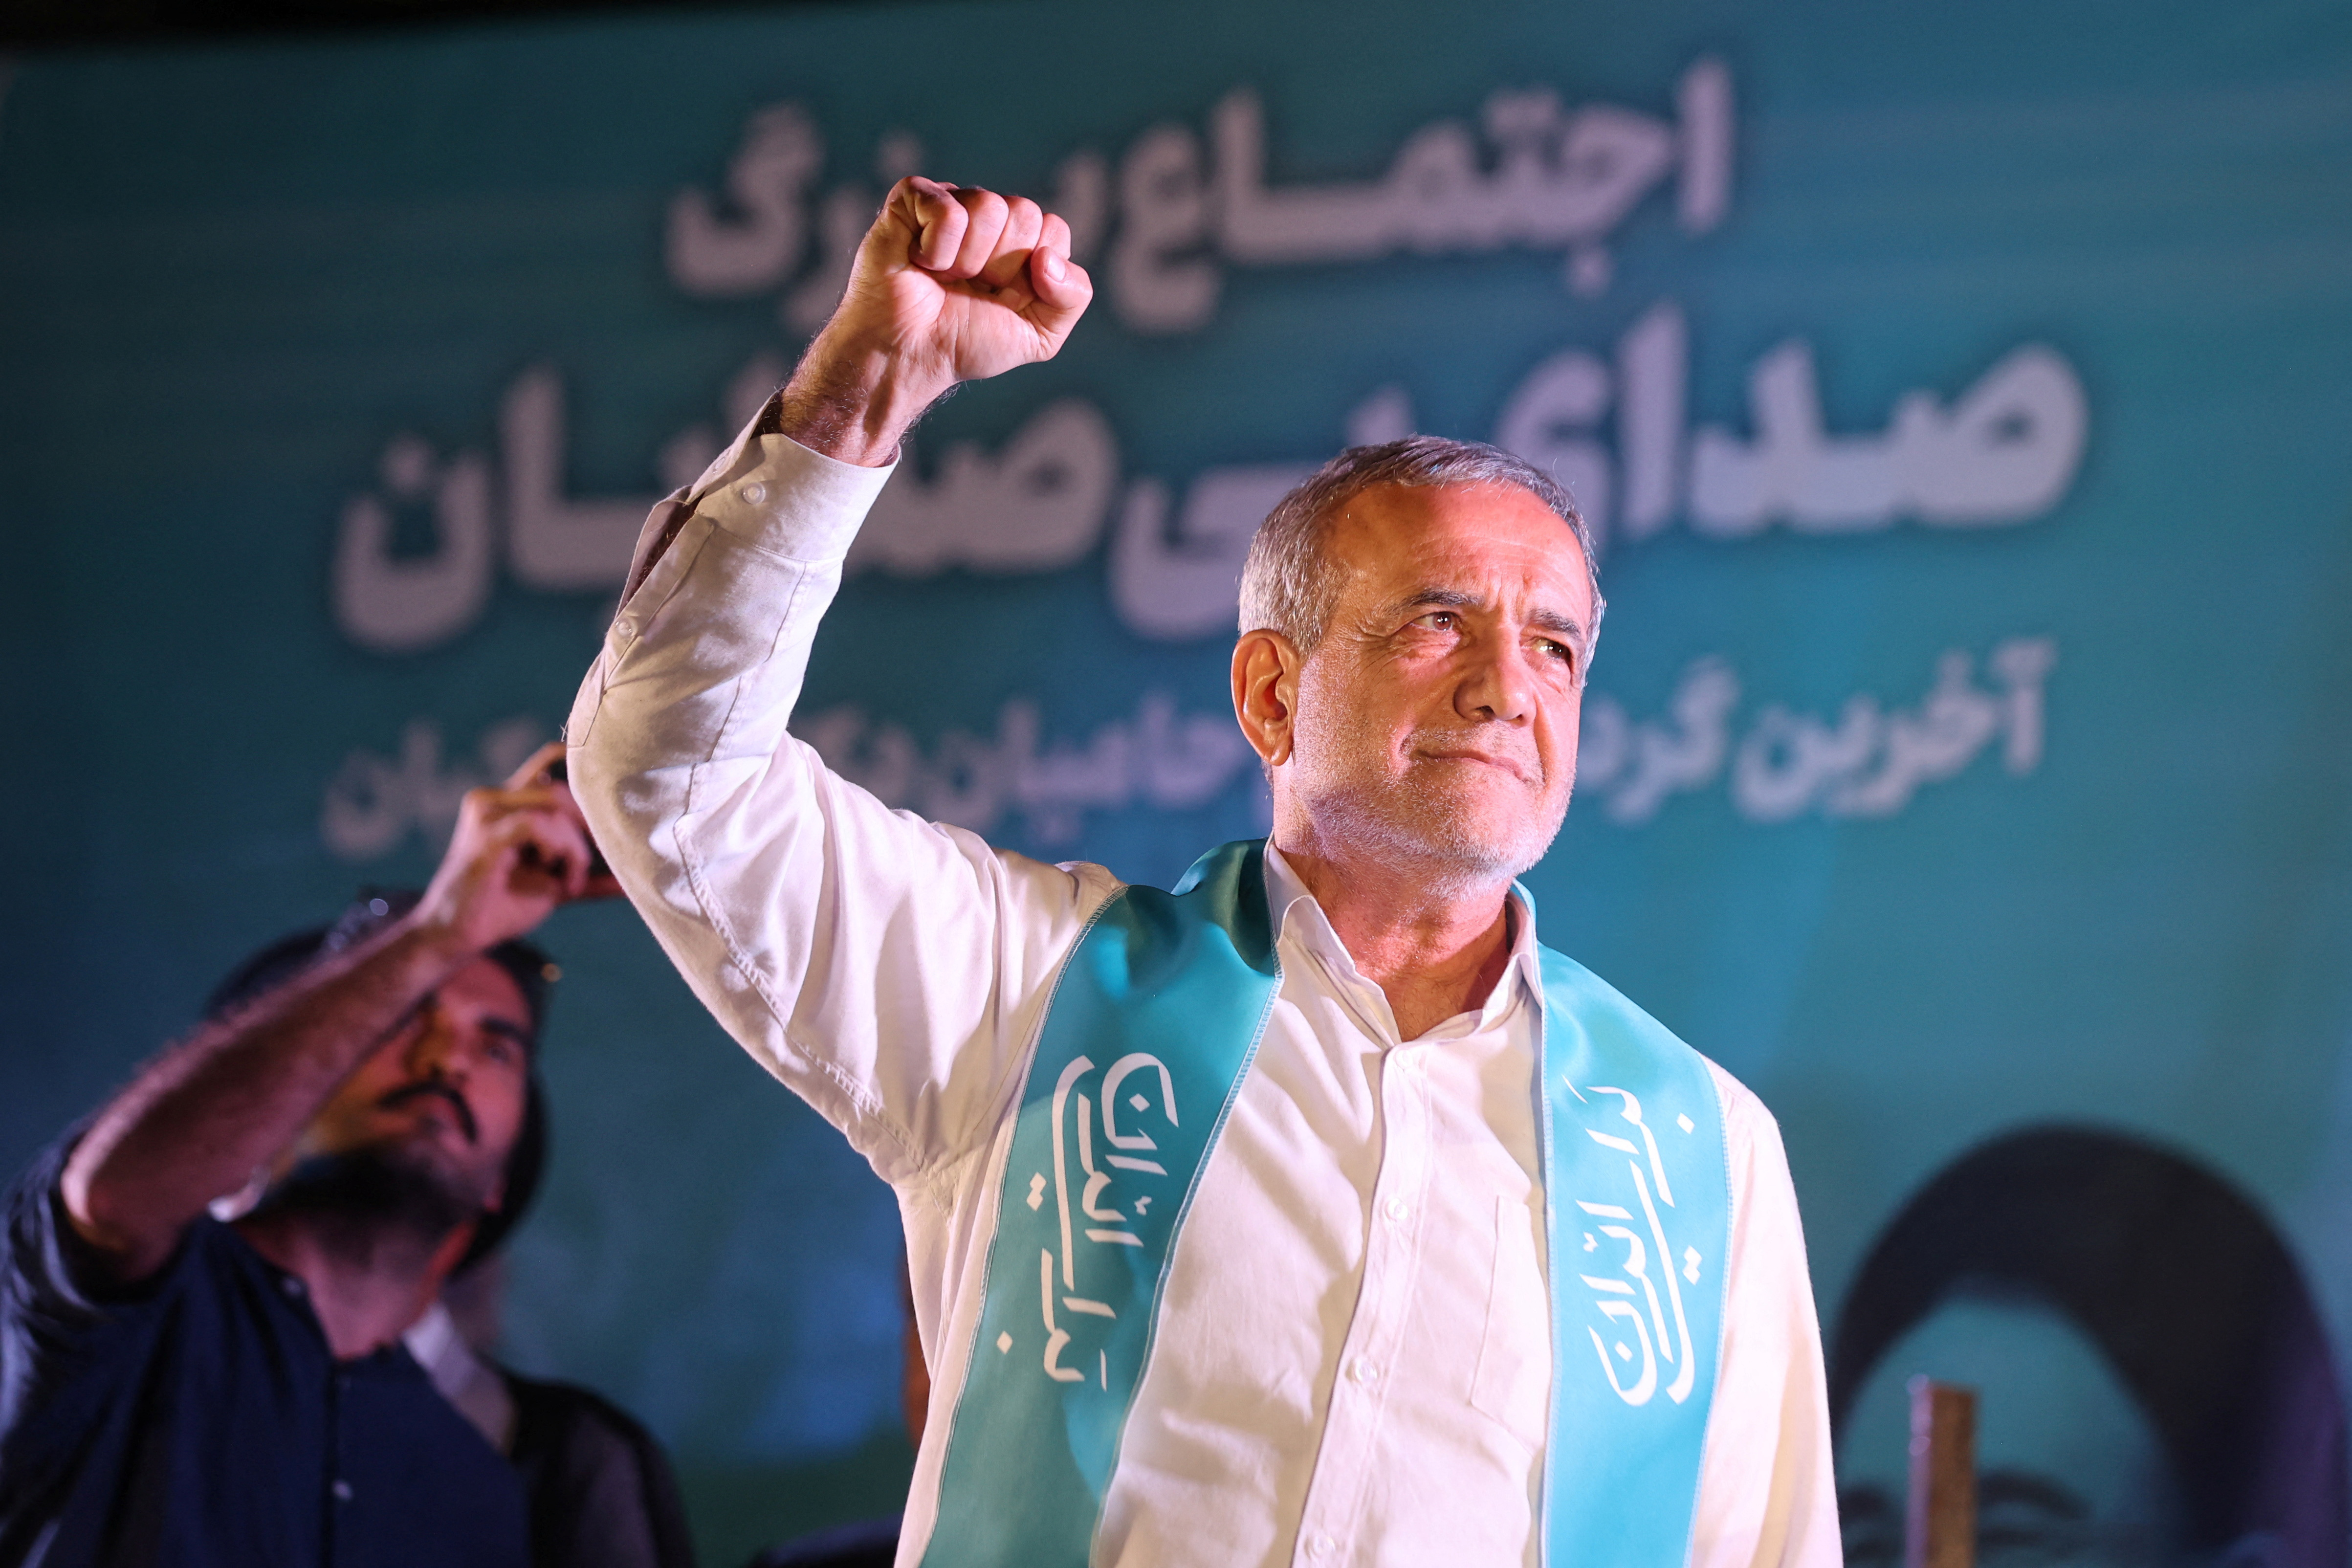 Iranian presidential candidate Masoud Pezeshkian holds a campaign event, in Tehran